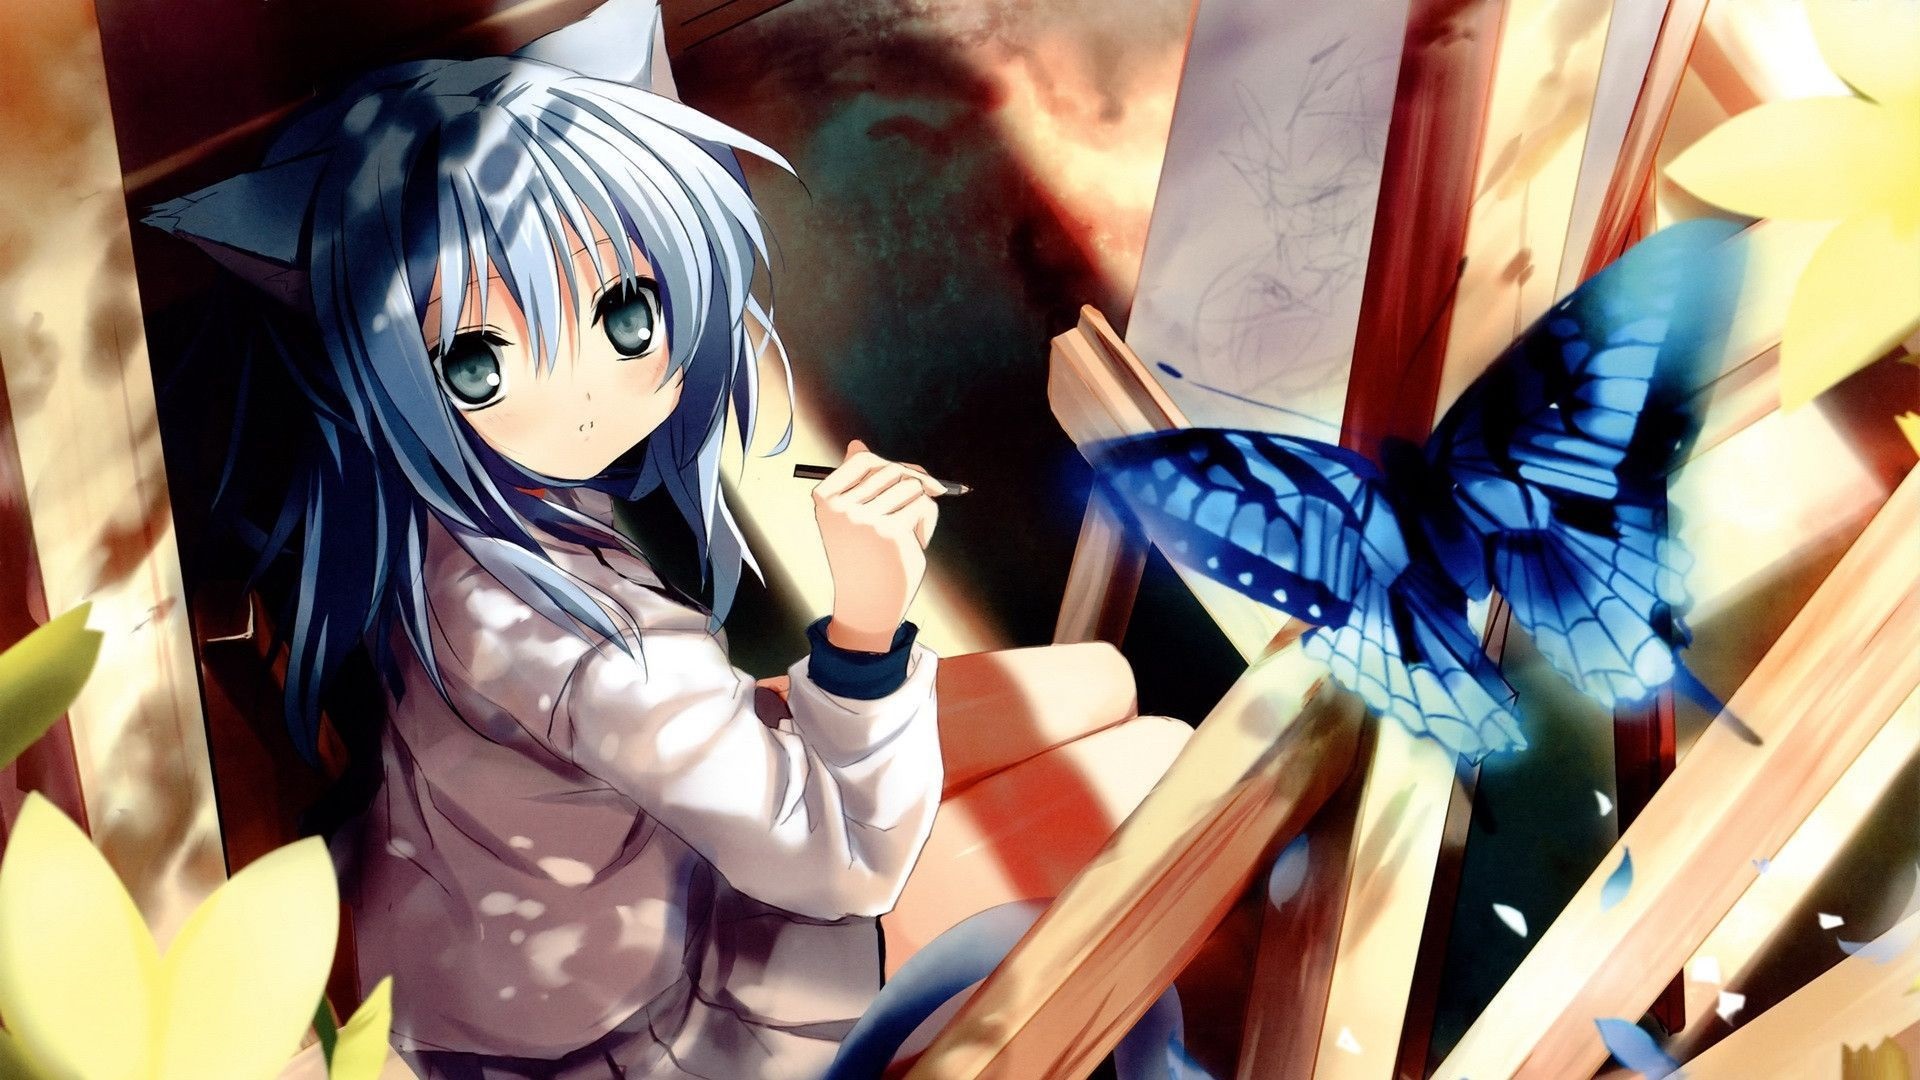 Wallpapers Computer Cool Anime  Live Wallpaper HD  Anime wallpaper  download Anime wallpaper 1920x1080 Cool anime backgrounds